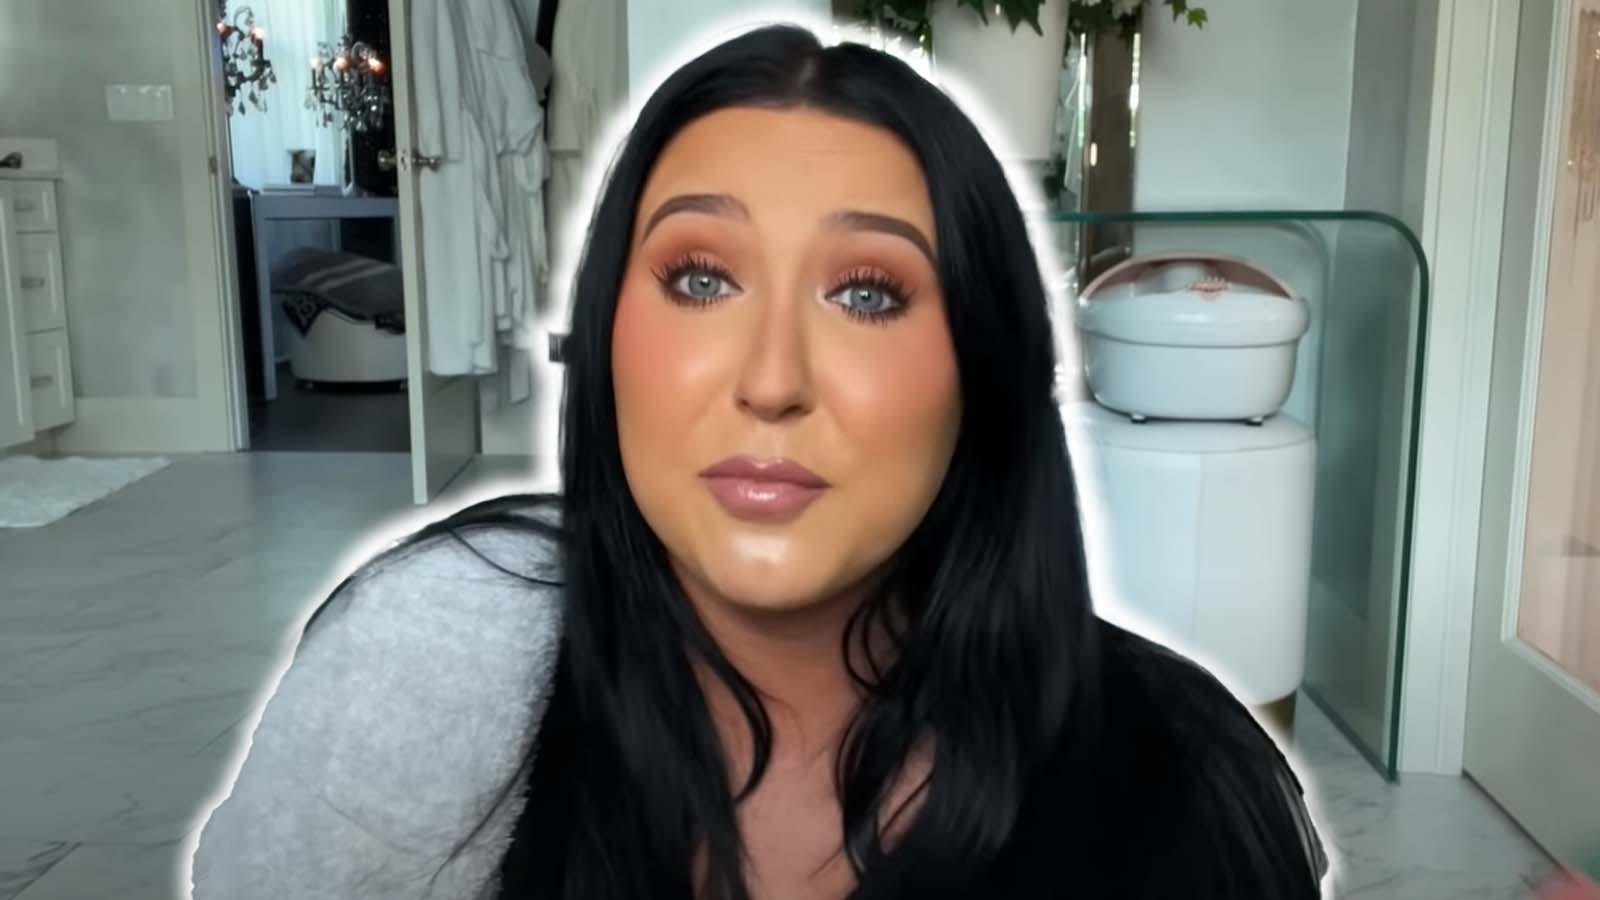 Jaclyn Hill begs Instagram trolls to stop 'awful' comments: “I'm